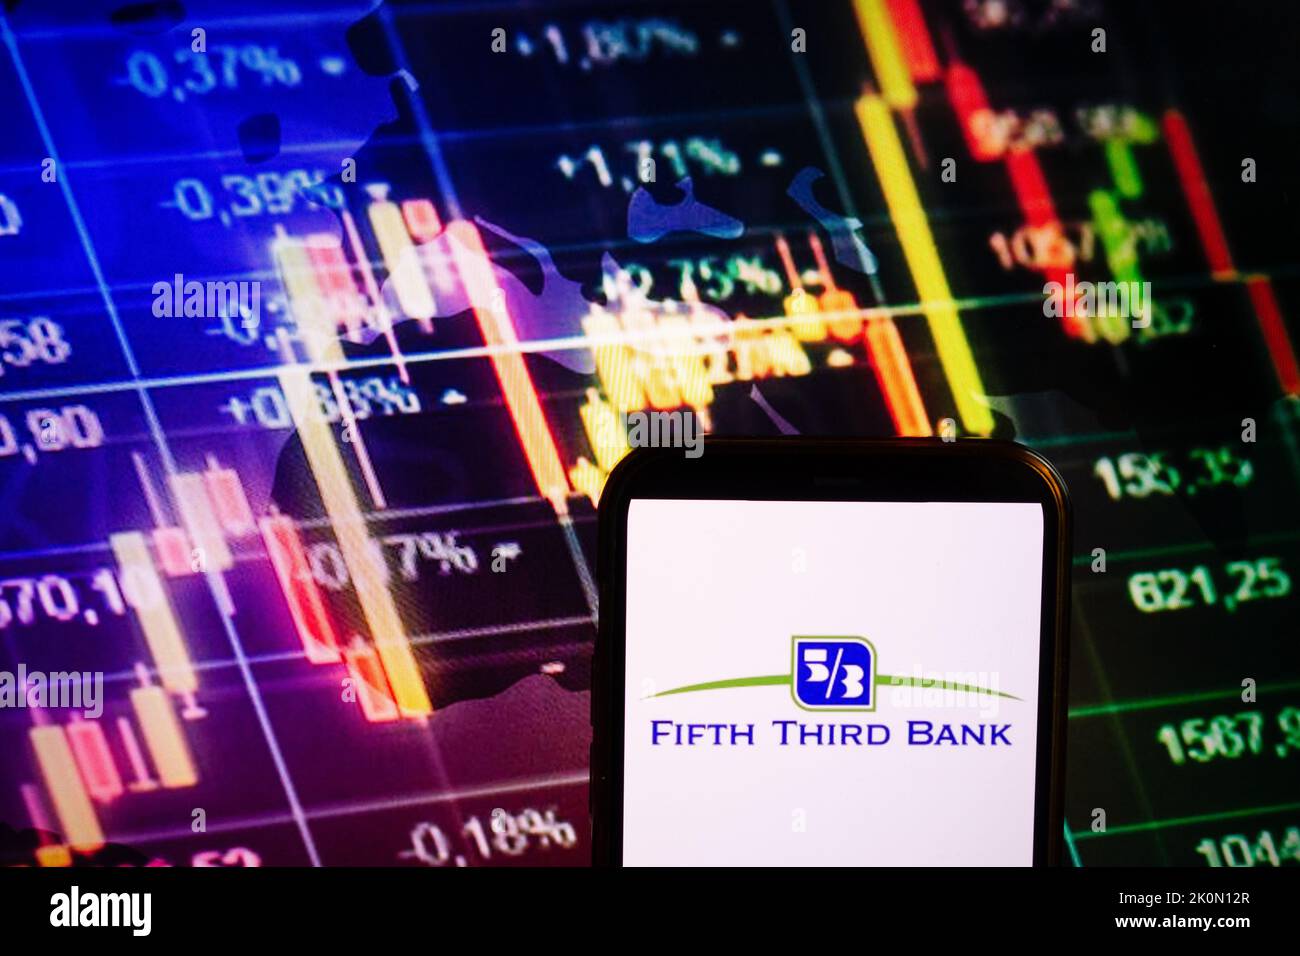 KONSKIE, POLAND - September 10, 2022: Smartphone displaying logo of Fifth Third Bank company on stock exchange diagram background Stock Photo